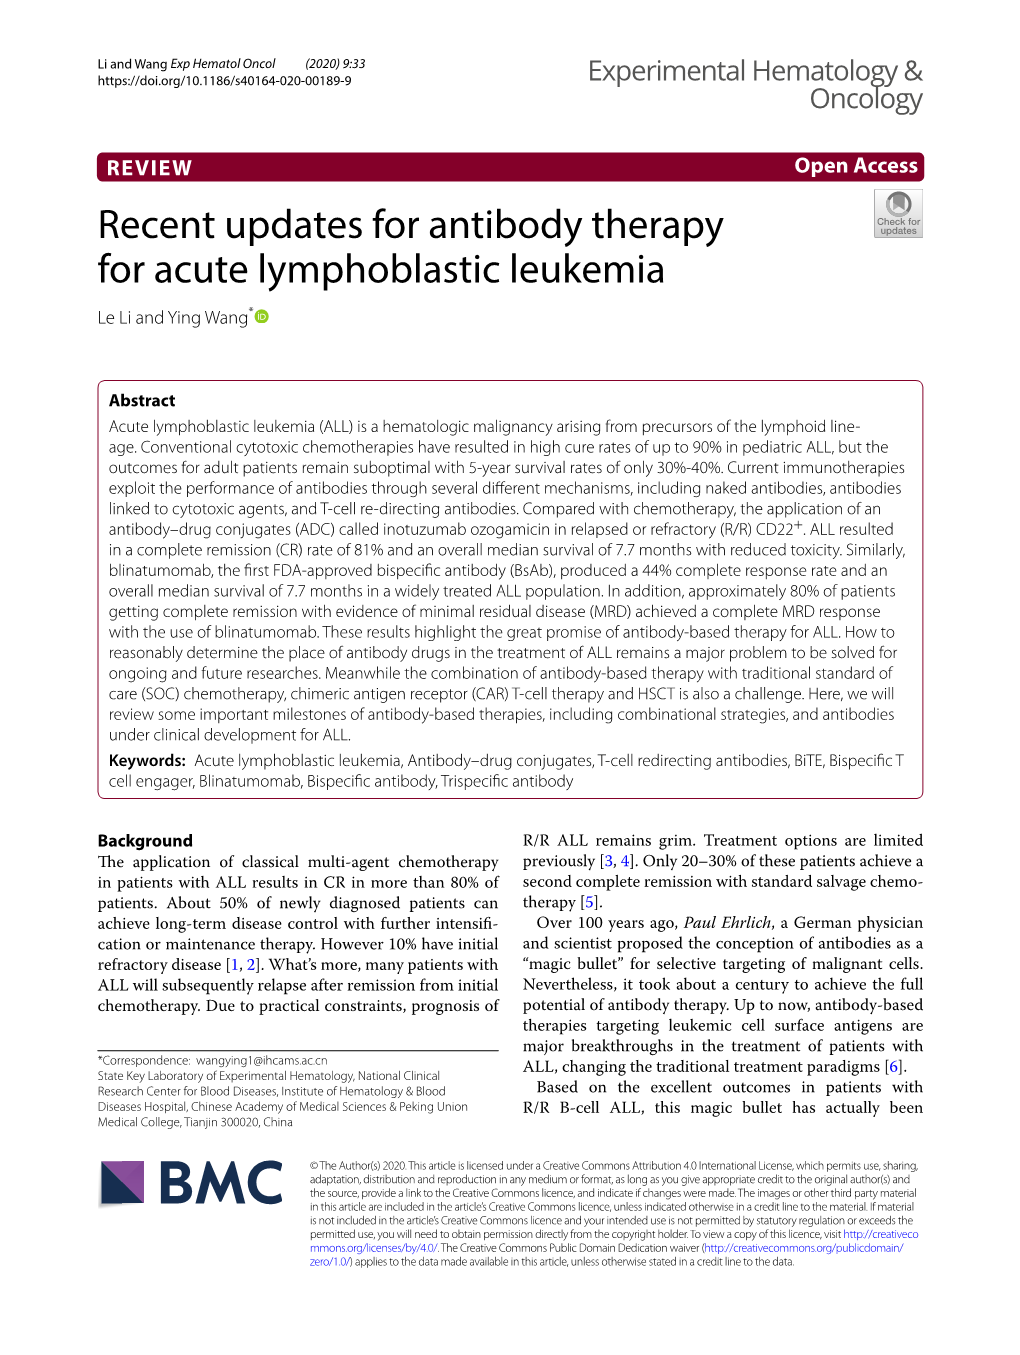 Recent Updates for Antibody Therapy for Acute Lymphoblastic Leukemia Le Li and Ying Wang*